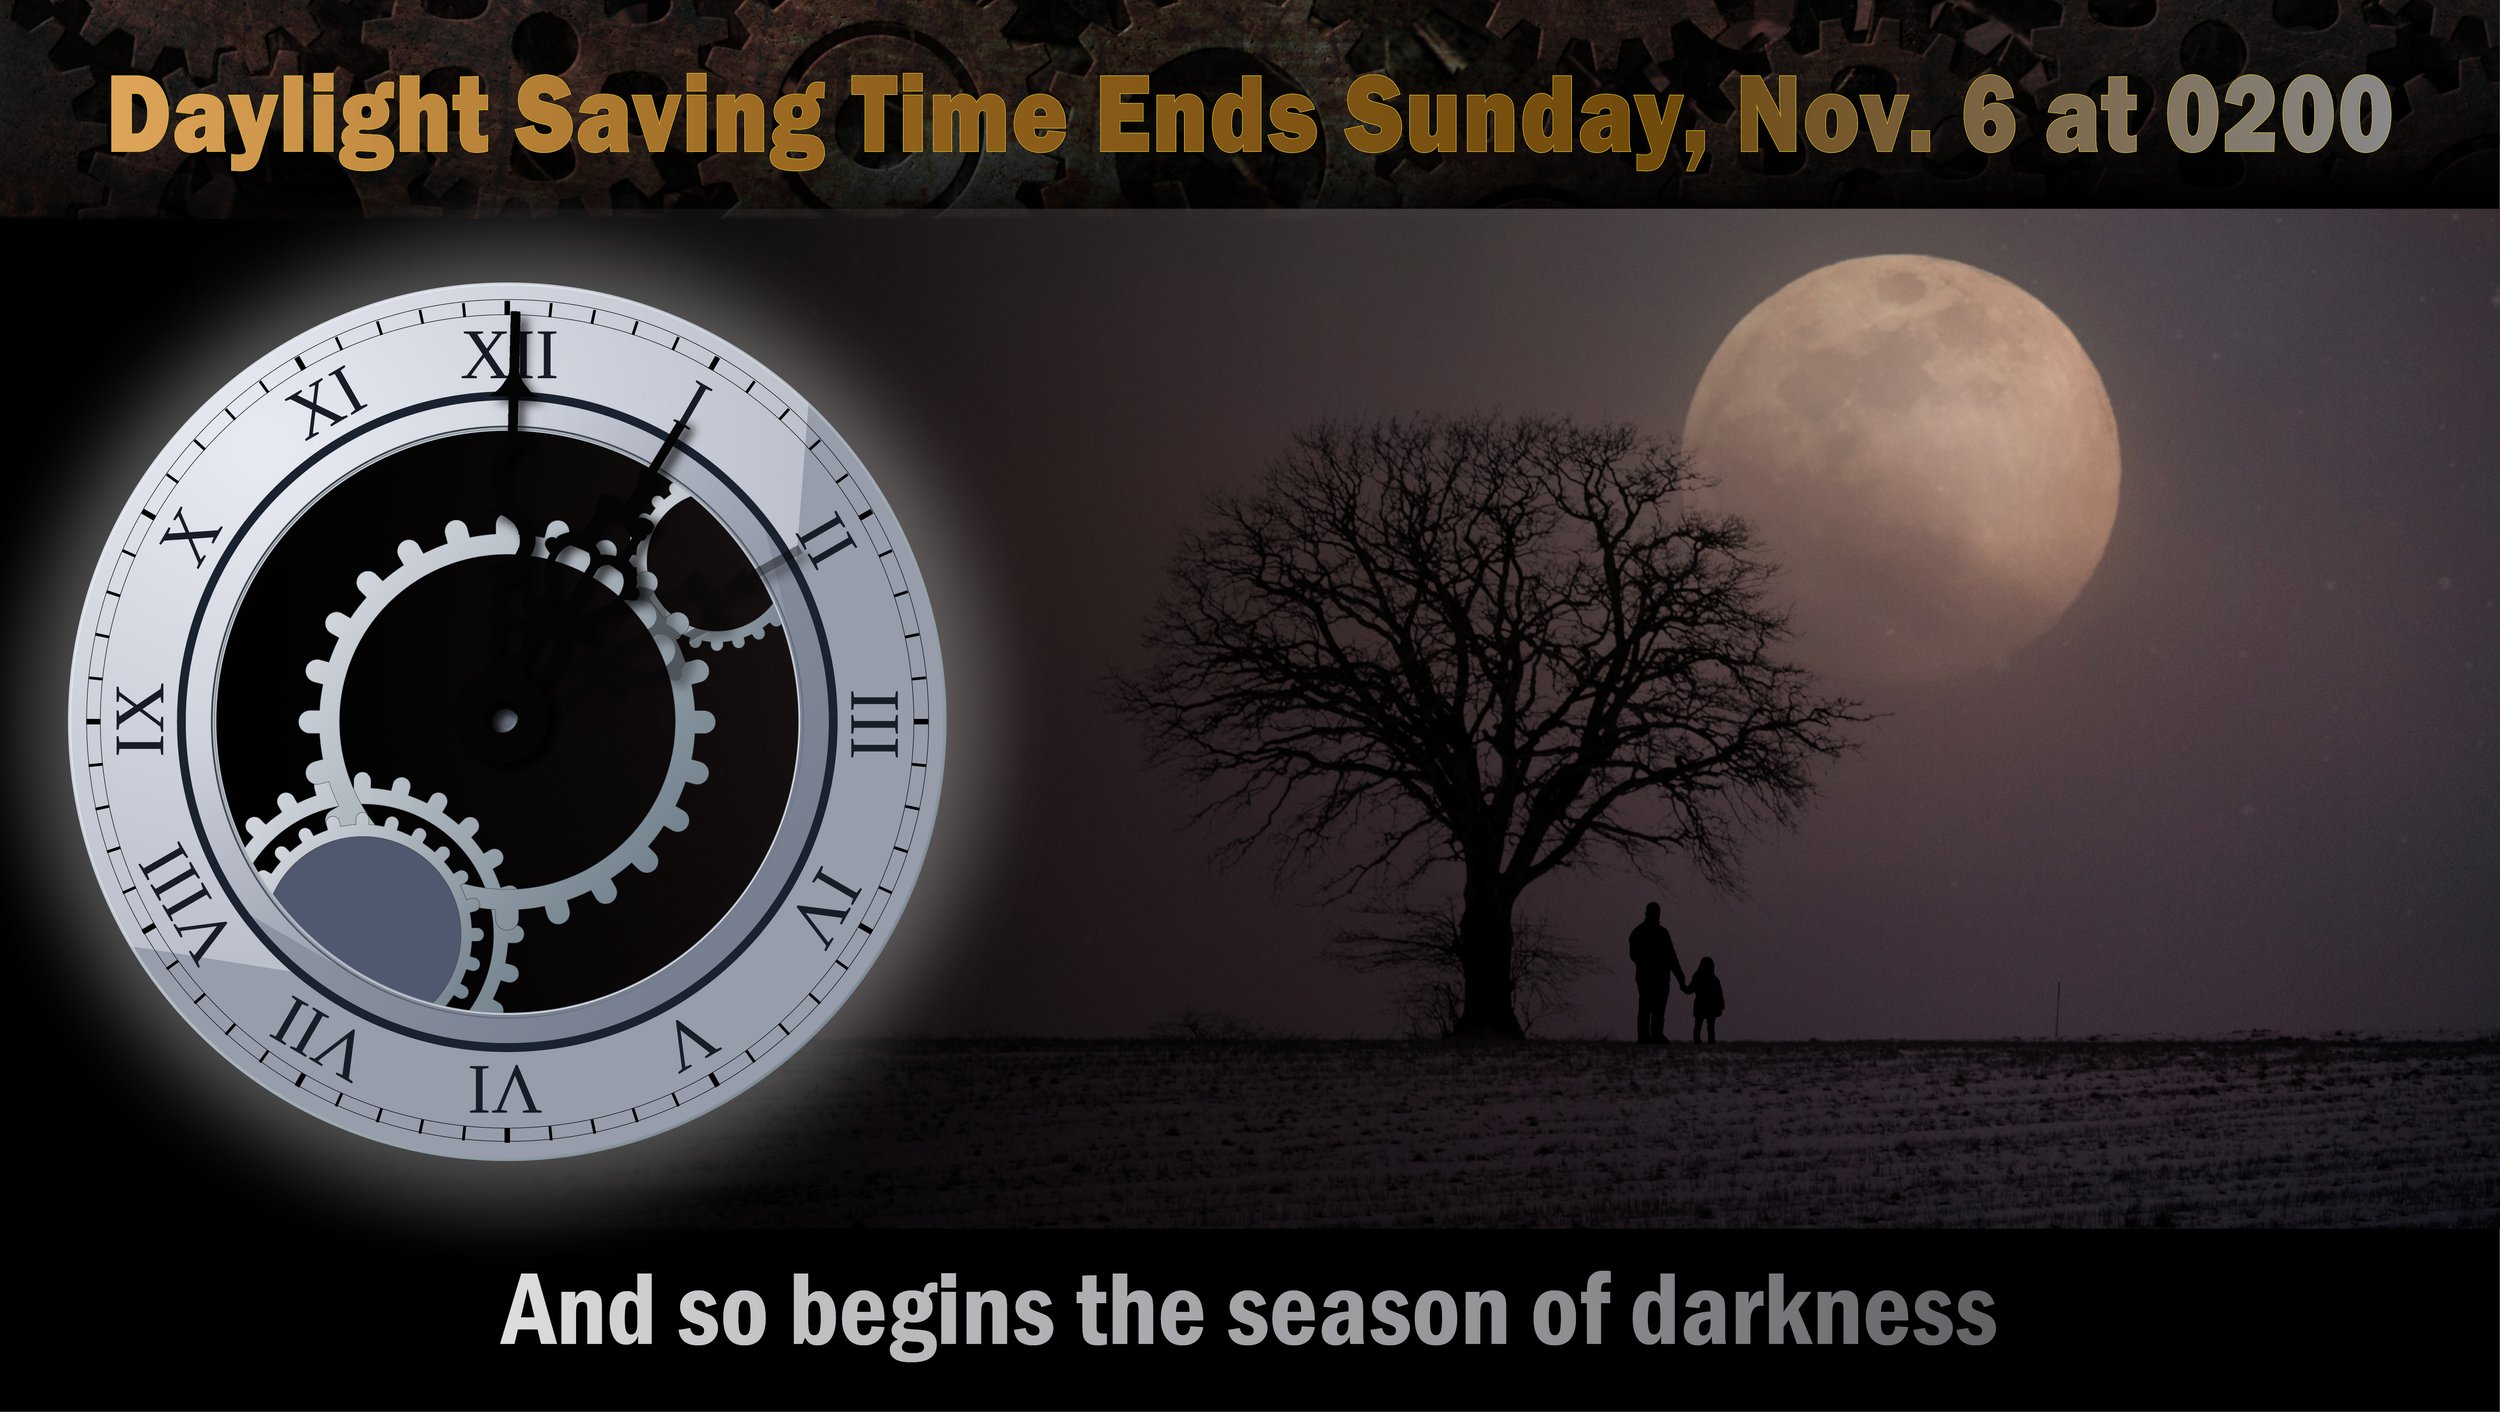  Infographic for the changover from daylight saving time to standard time. 